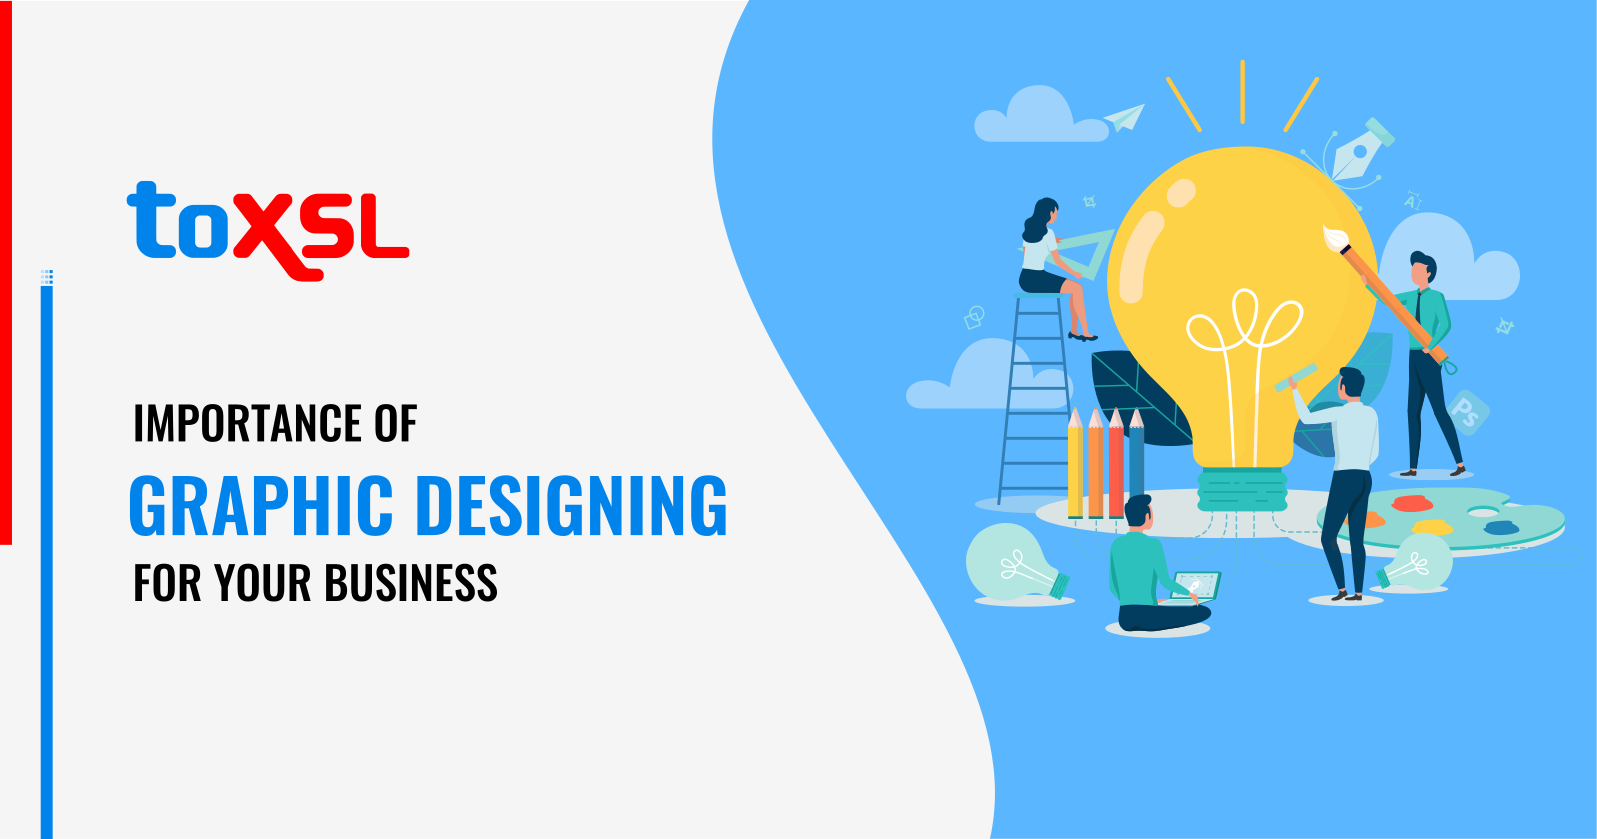 IMPORTANCE OF GRAPHIC DESIGNING FOR YOUR BUSINESS